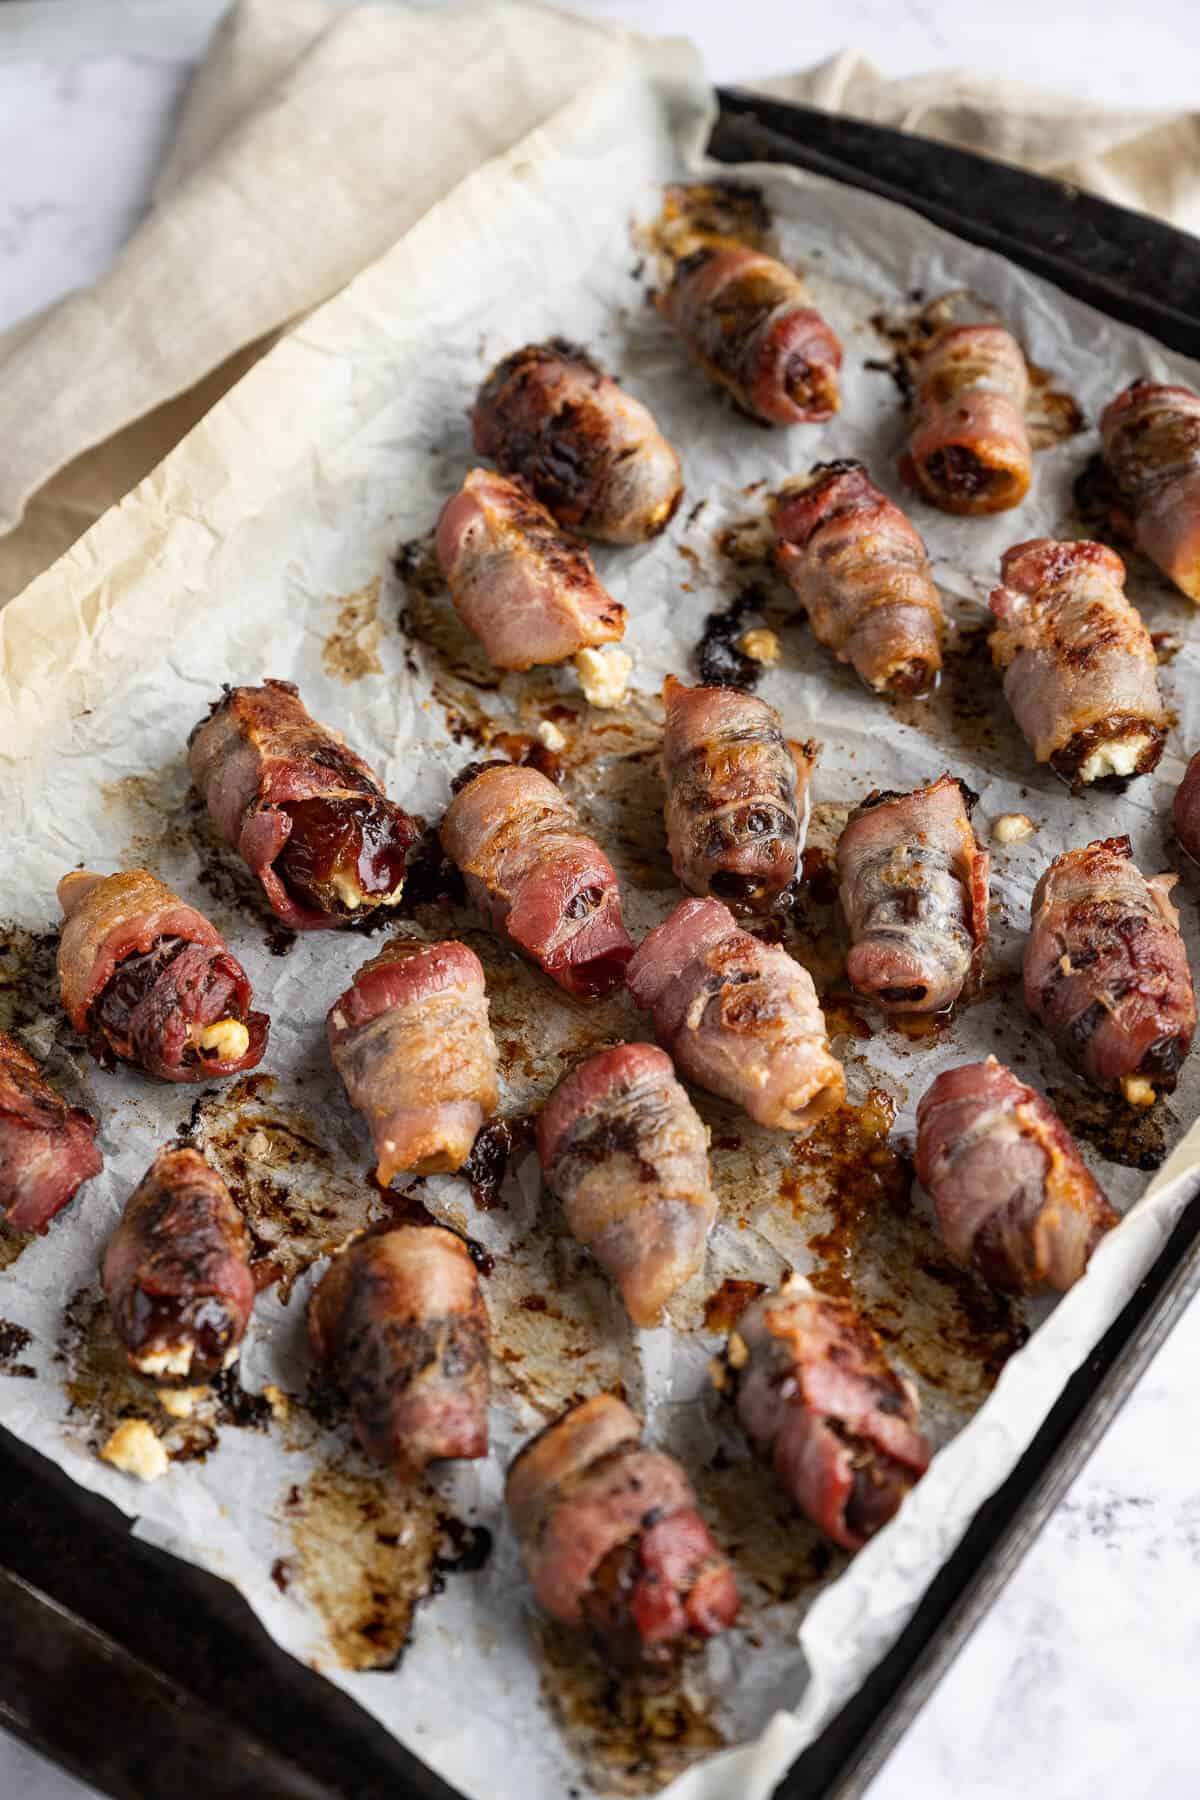 Baked bacon wrapped dates on a sheet pan.